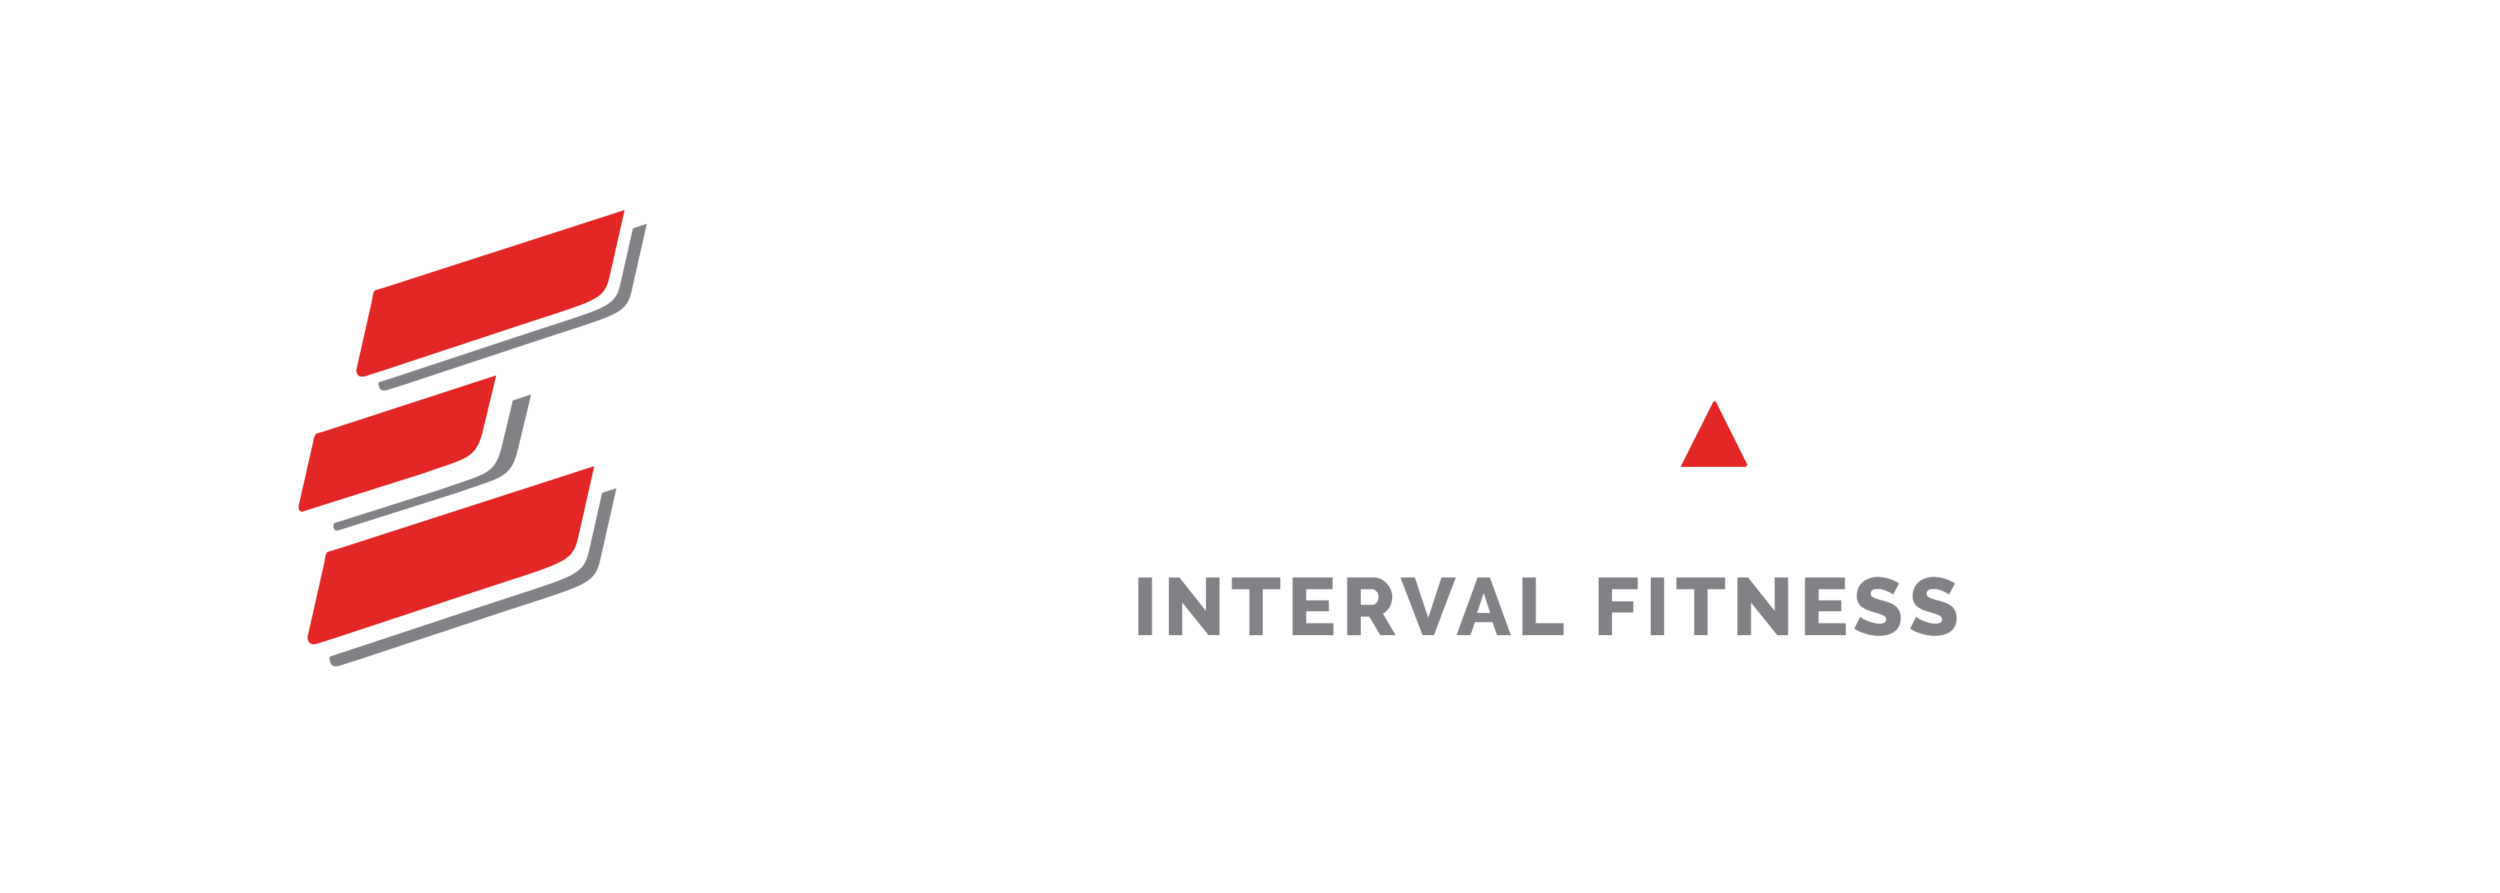 Elevate Interval Fitness